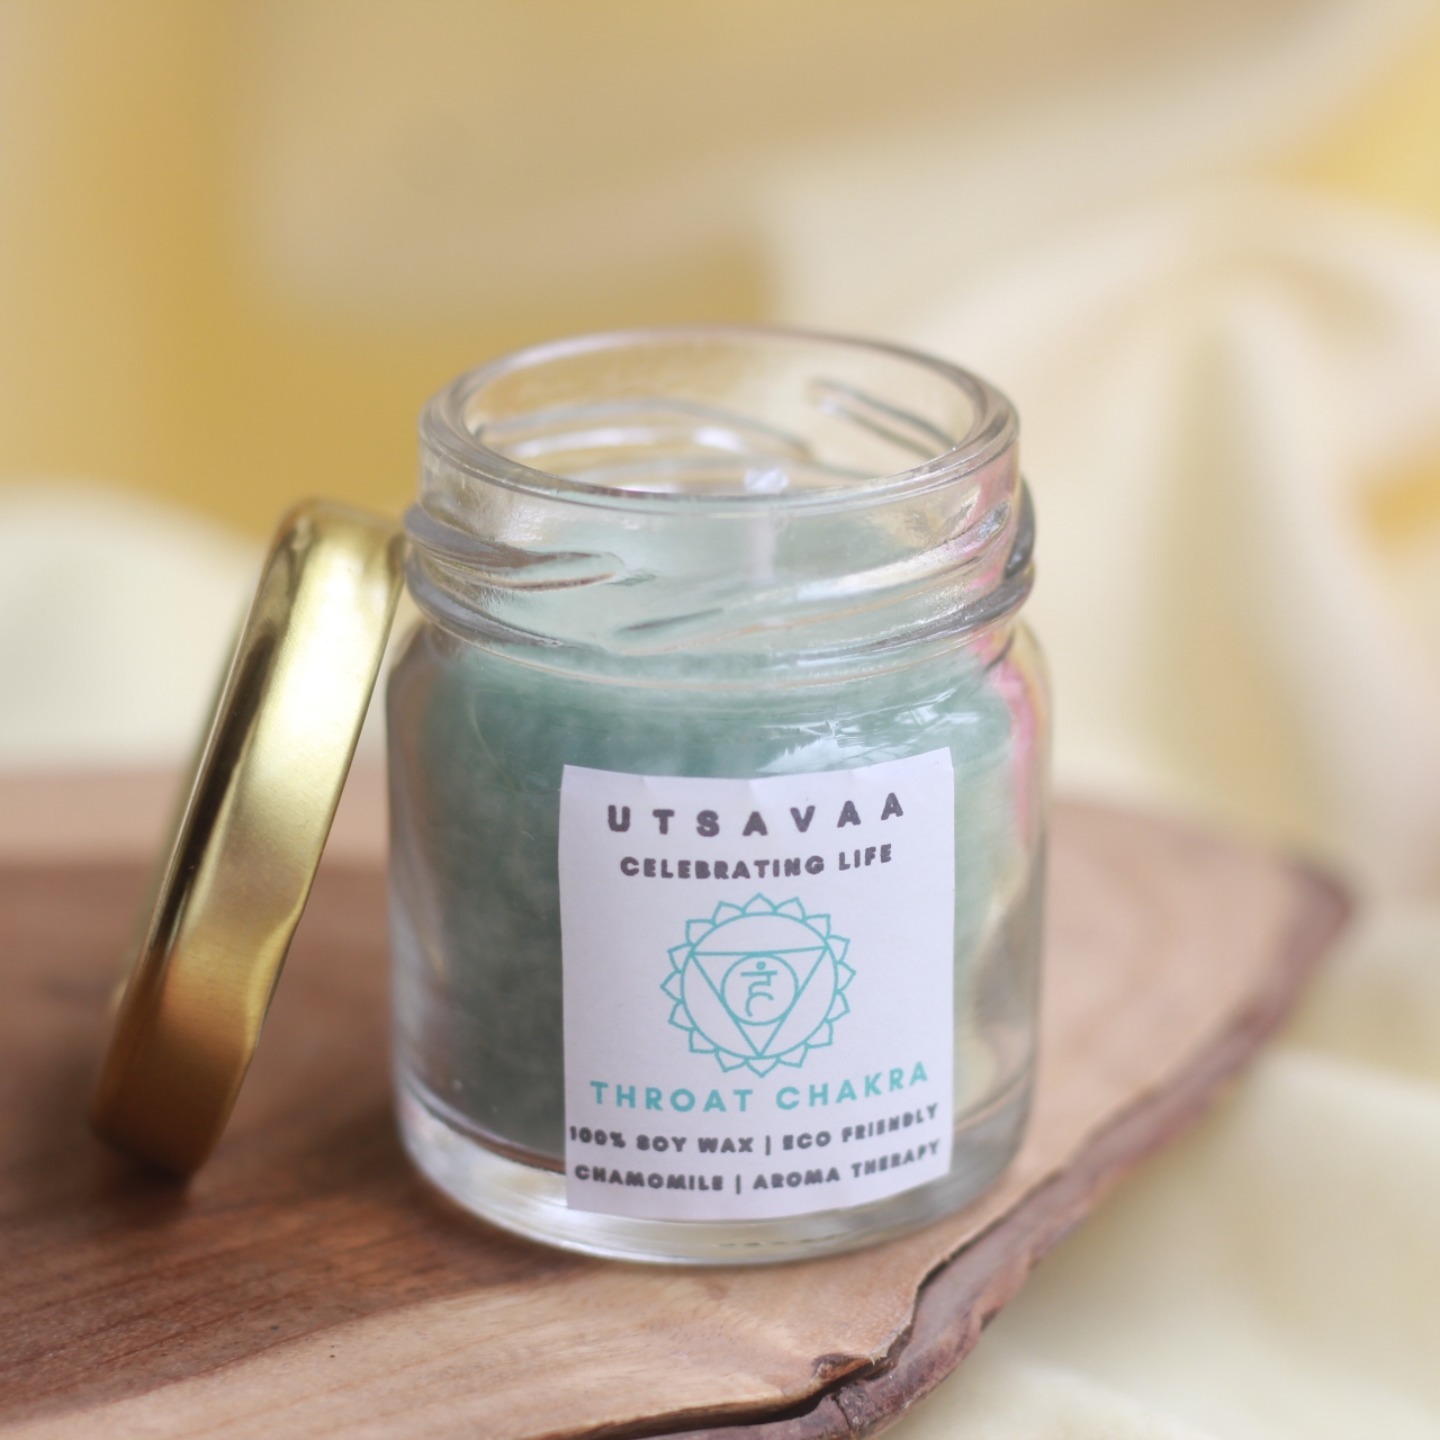 Throat Chakra Soy Wax Candles Aroma Therapy